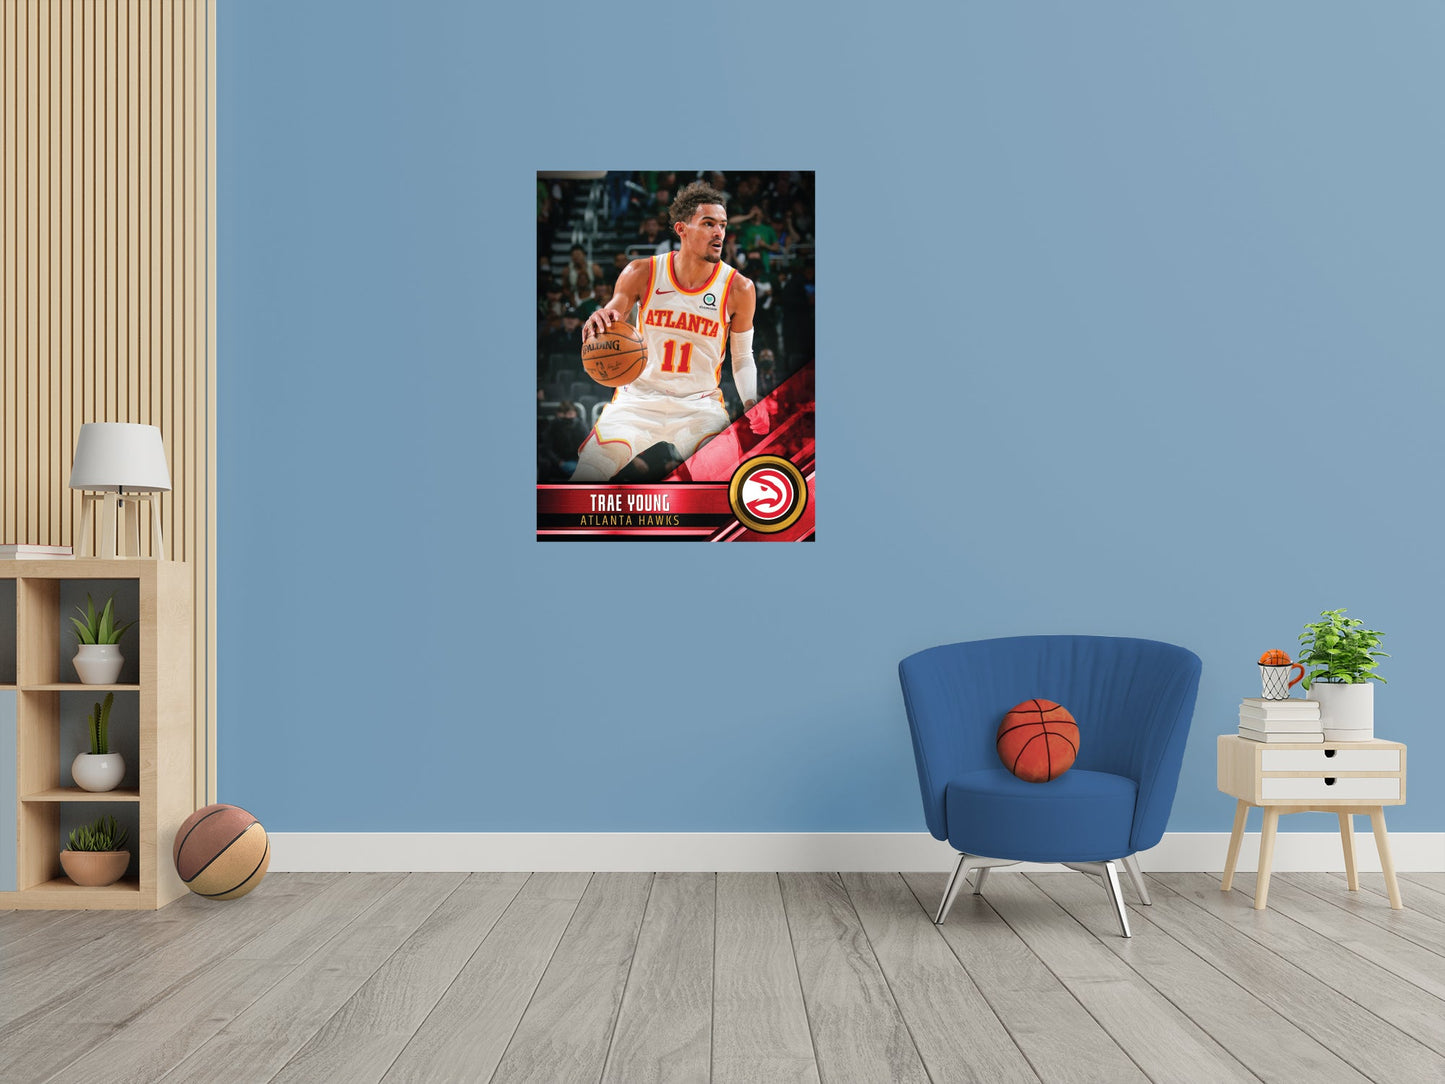 Atlanta Hawks: Trae Young Poster - Officially Licensed NBA Removable Adhesive Decal